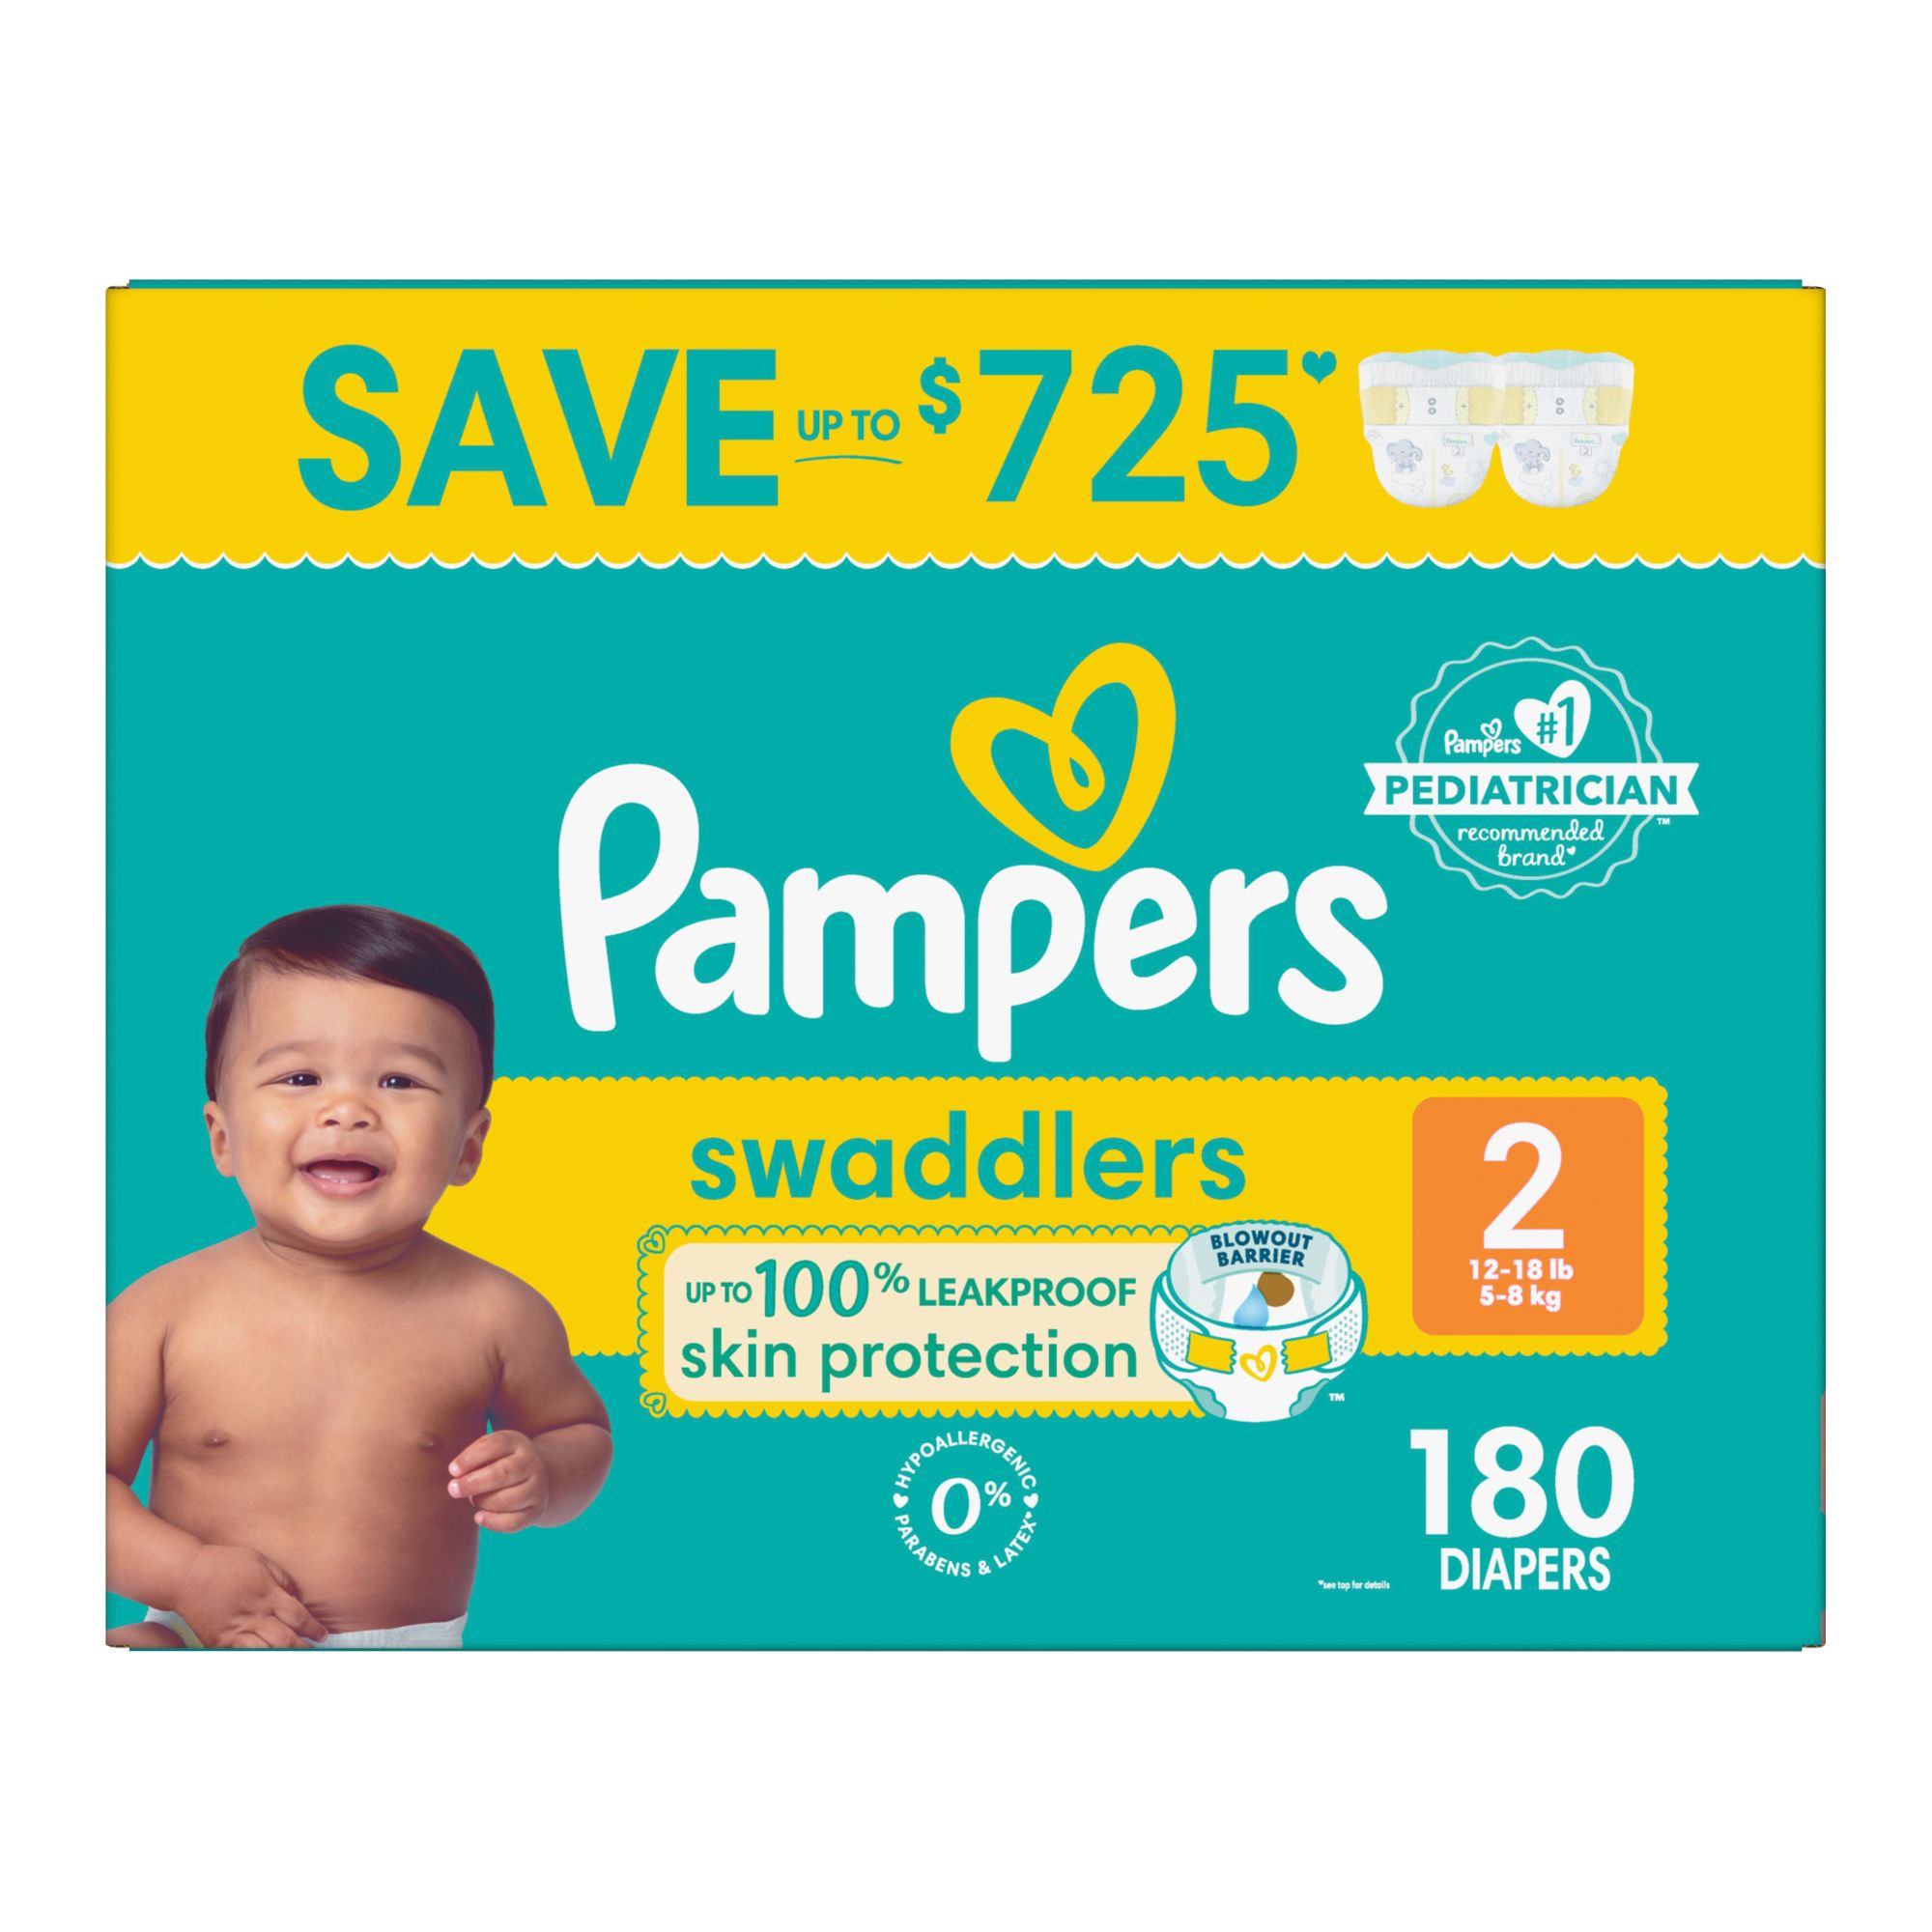 Pampers® Baby-Dry™ Couches